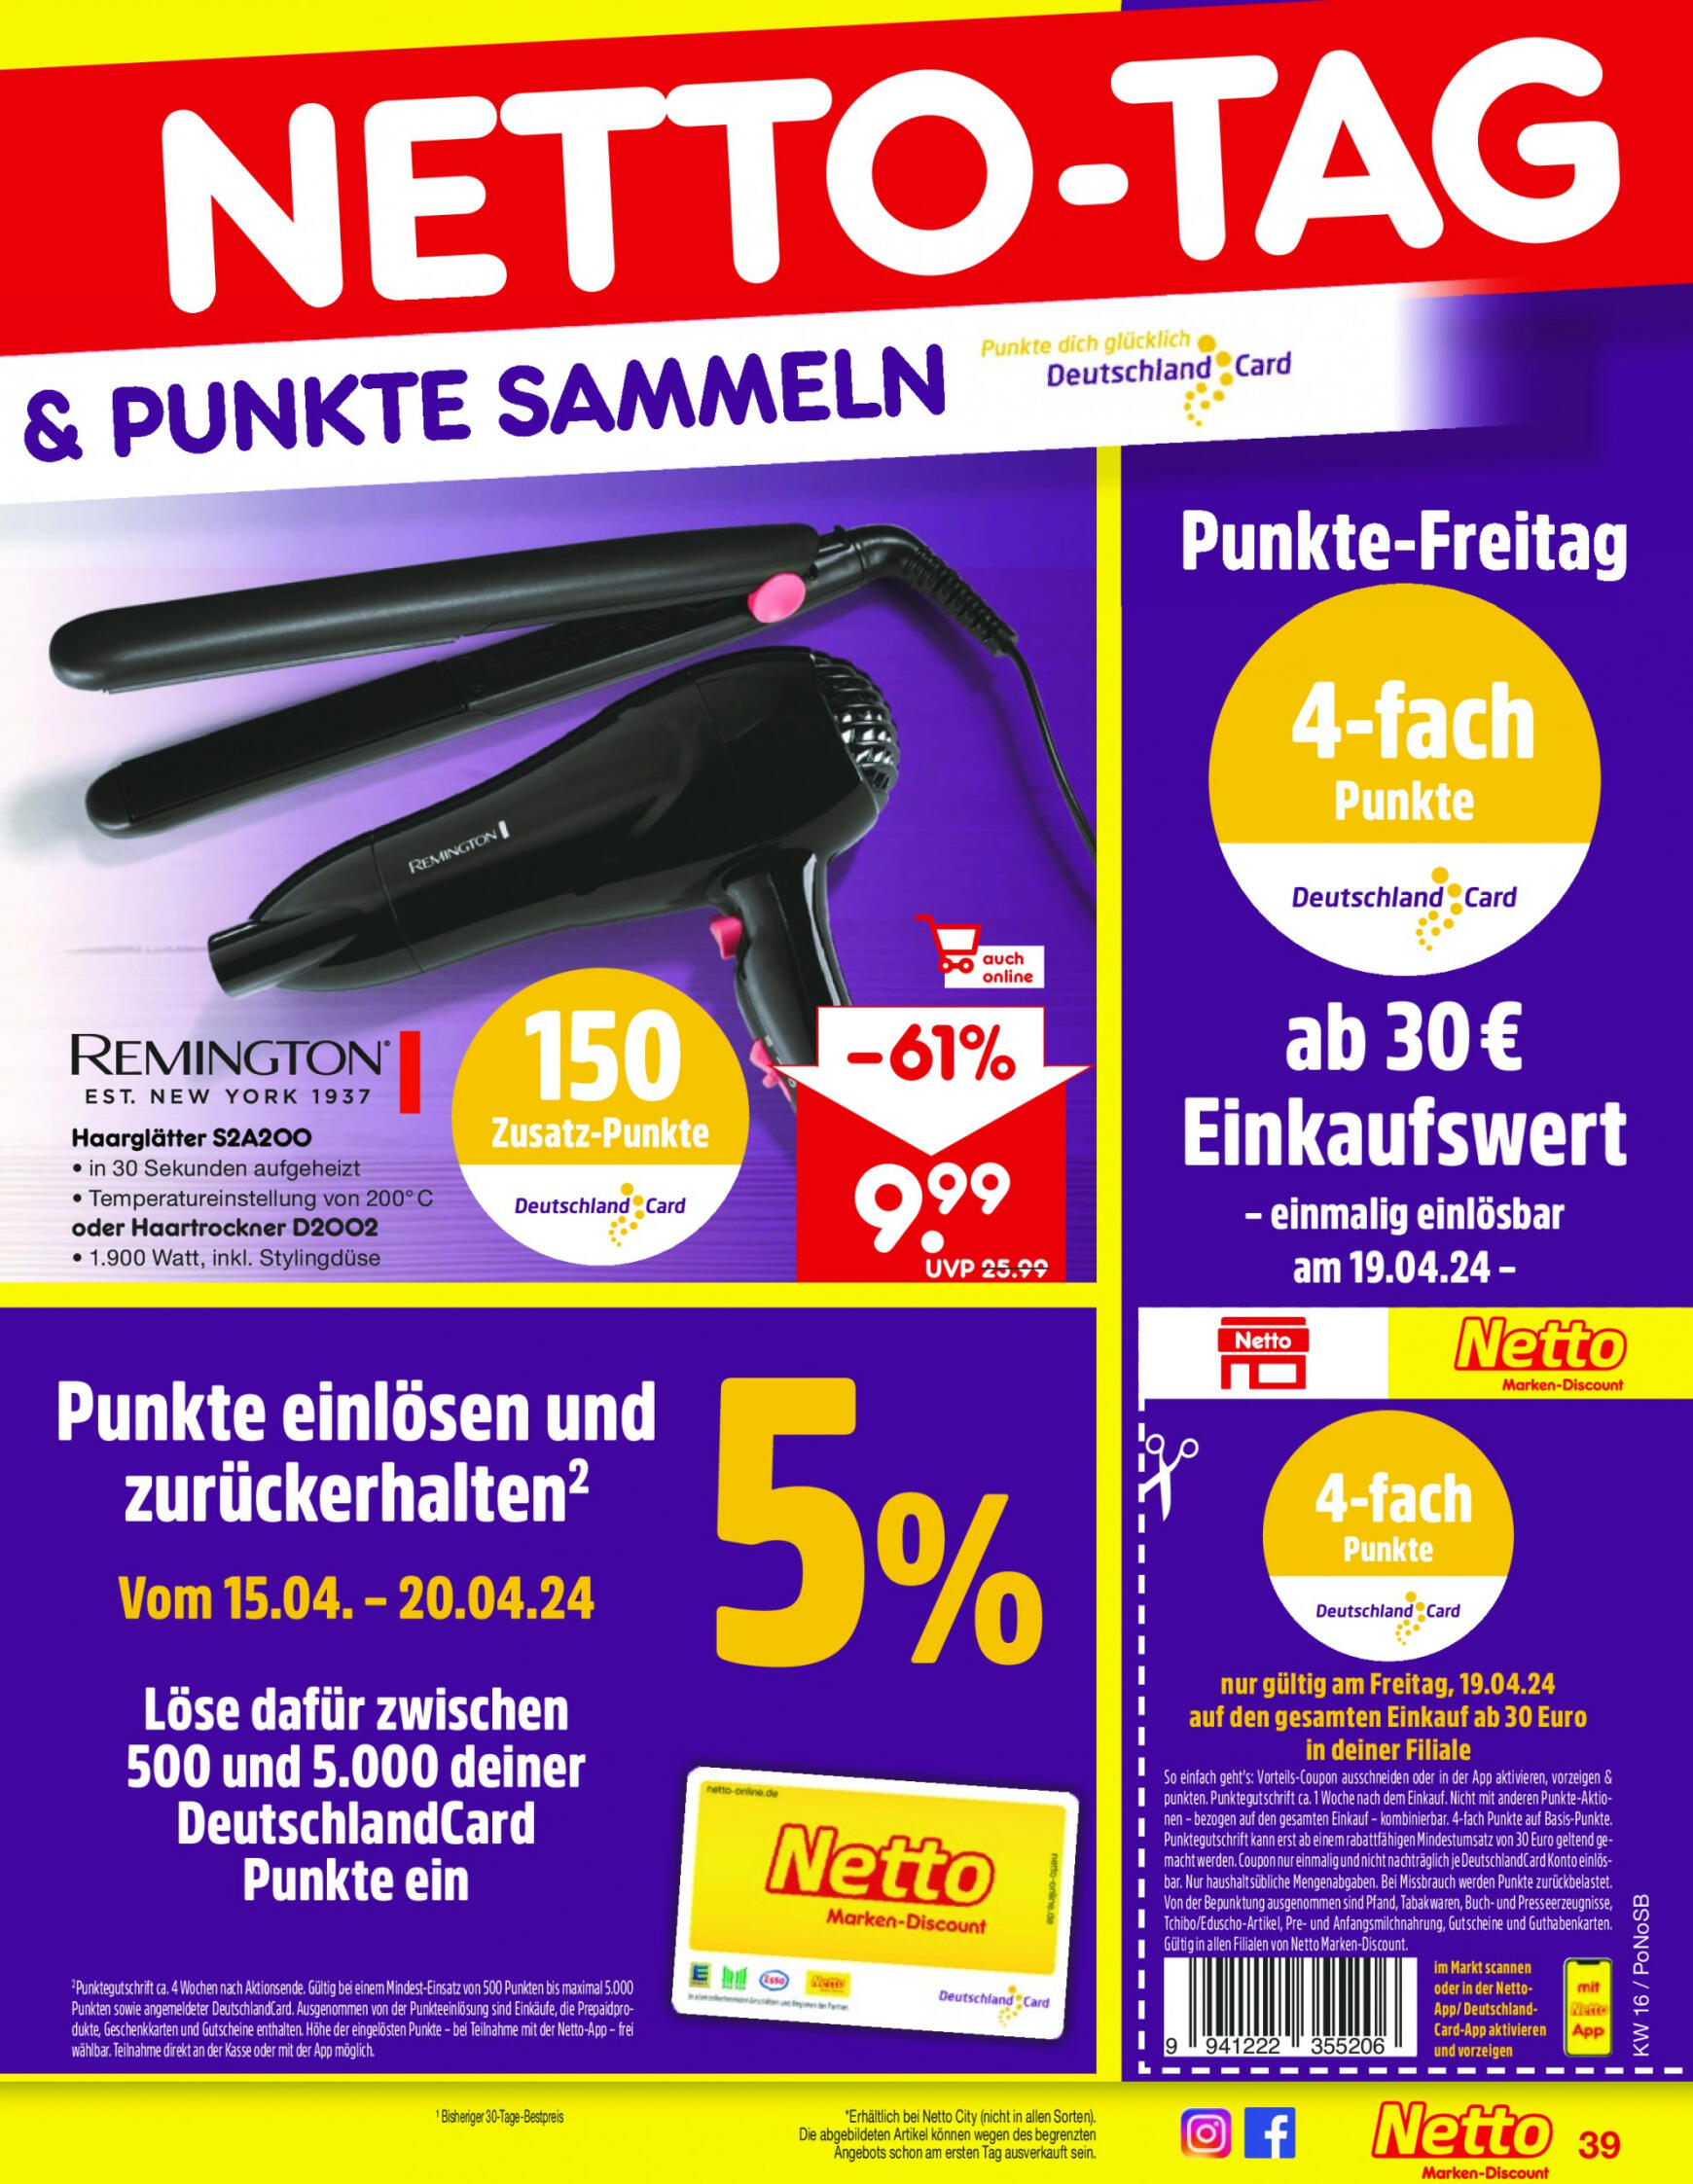 netto - Flyer Netto aktuell 15.04. - 20.04. - page: 45